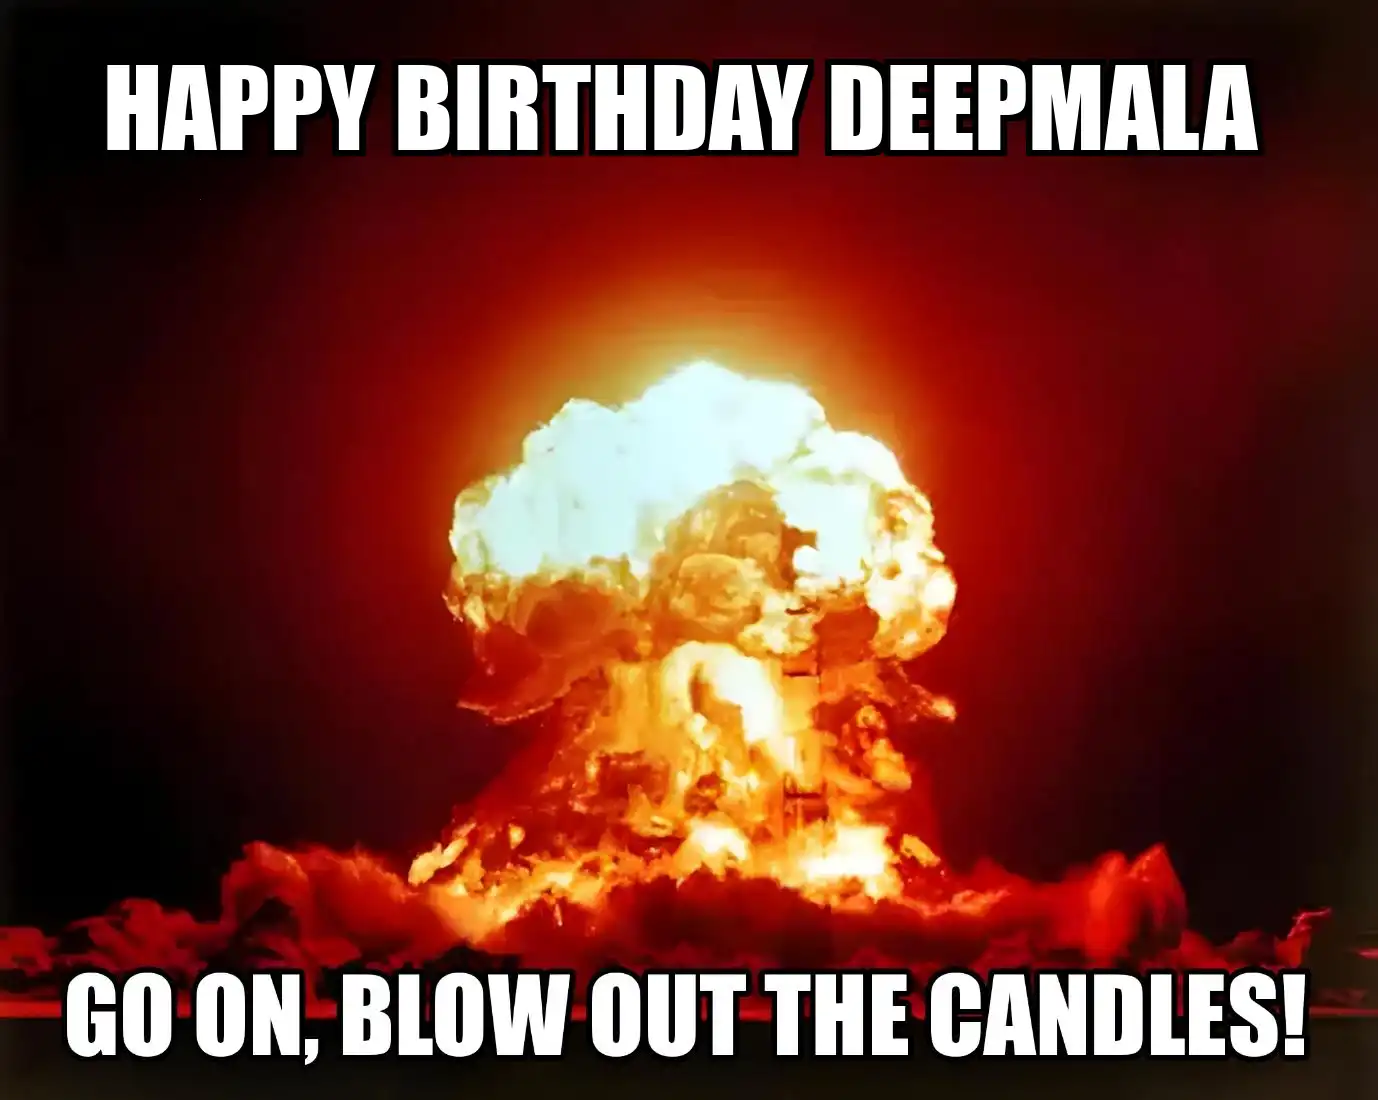 Happy Birthday Deepmala Go On Blow Out The Candles Meme